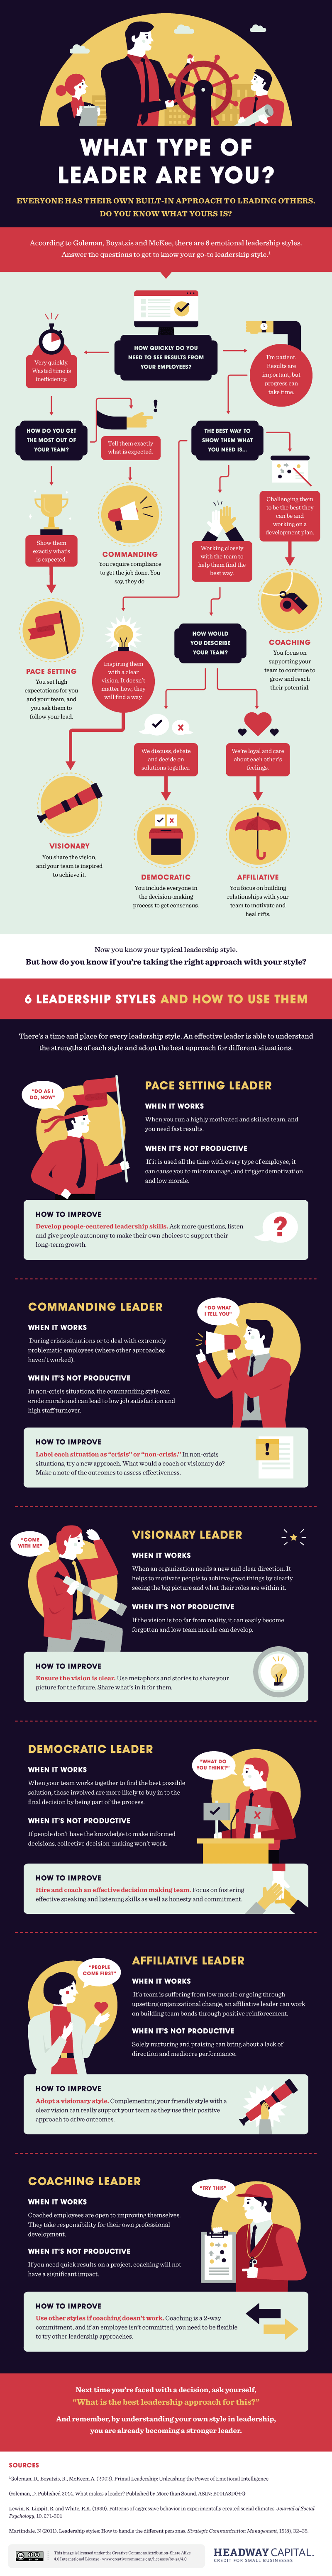 Find Your Leadership Style With This Flowchart [Infographic]